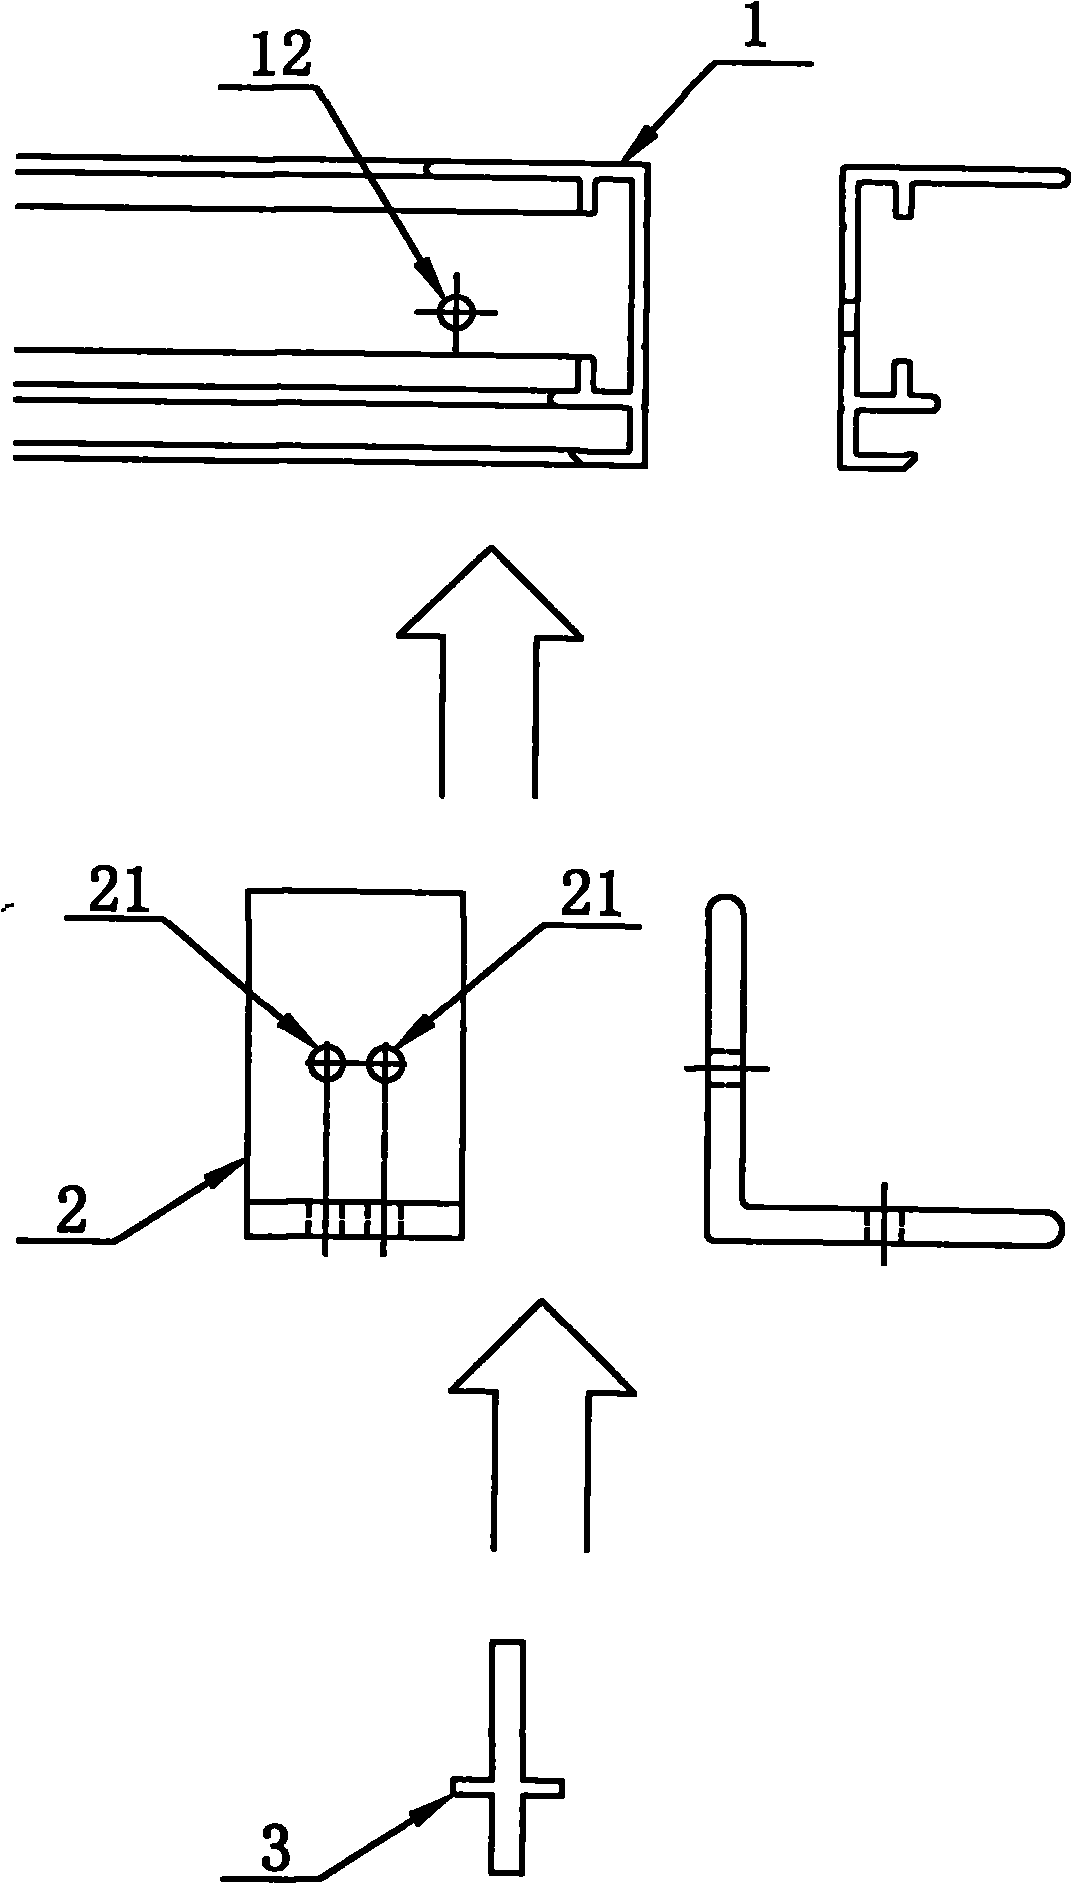 Frame structure for solar photovoltaic component